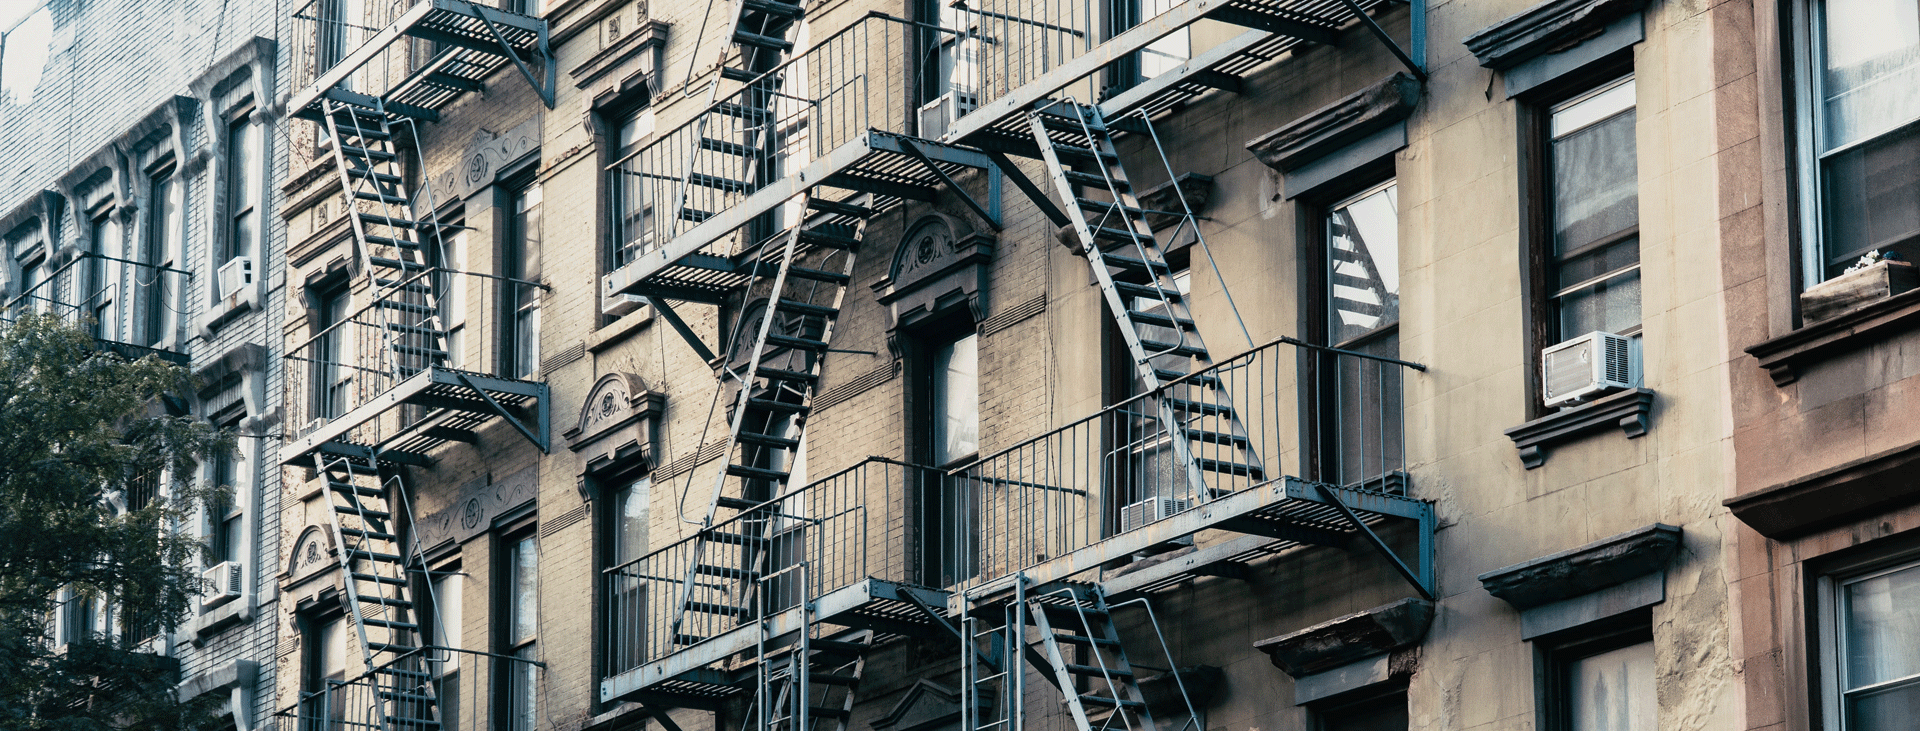 Fire exit ladders on building